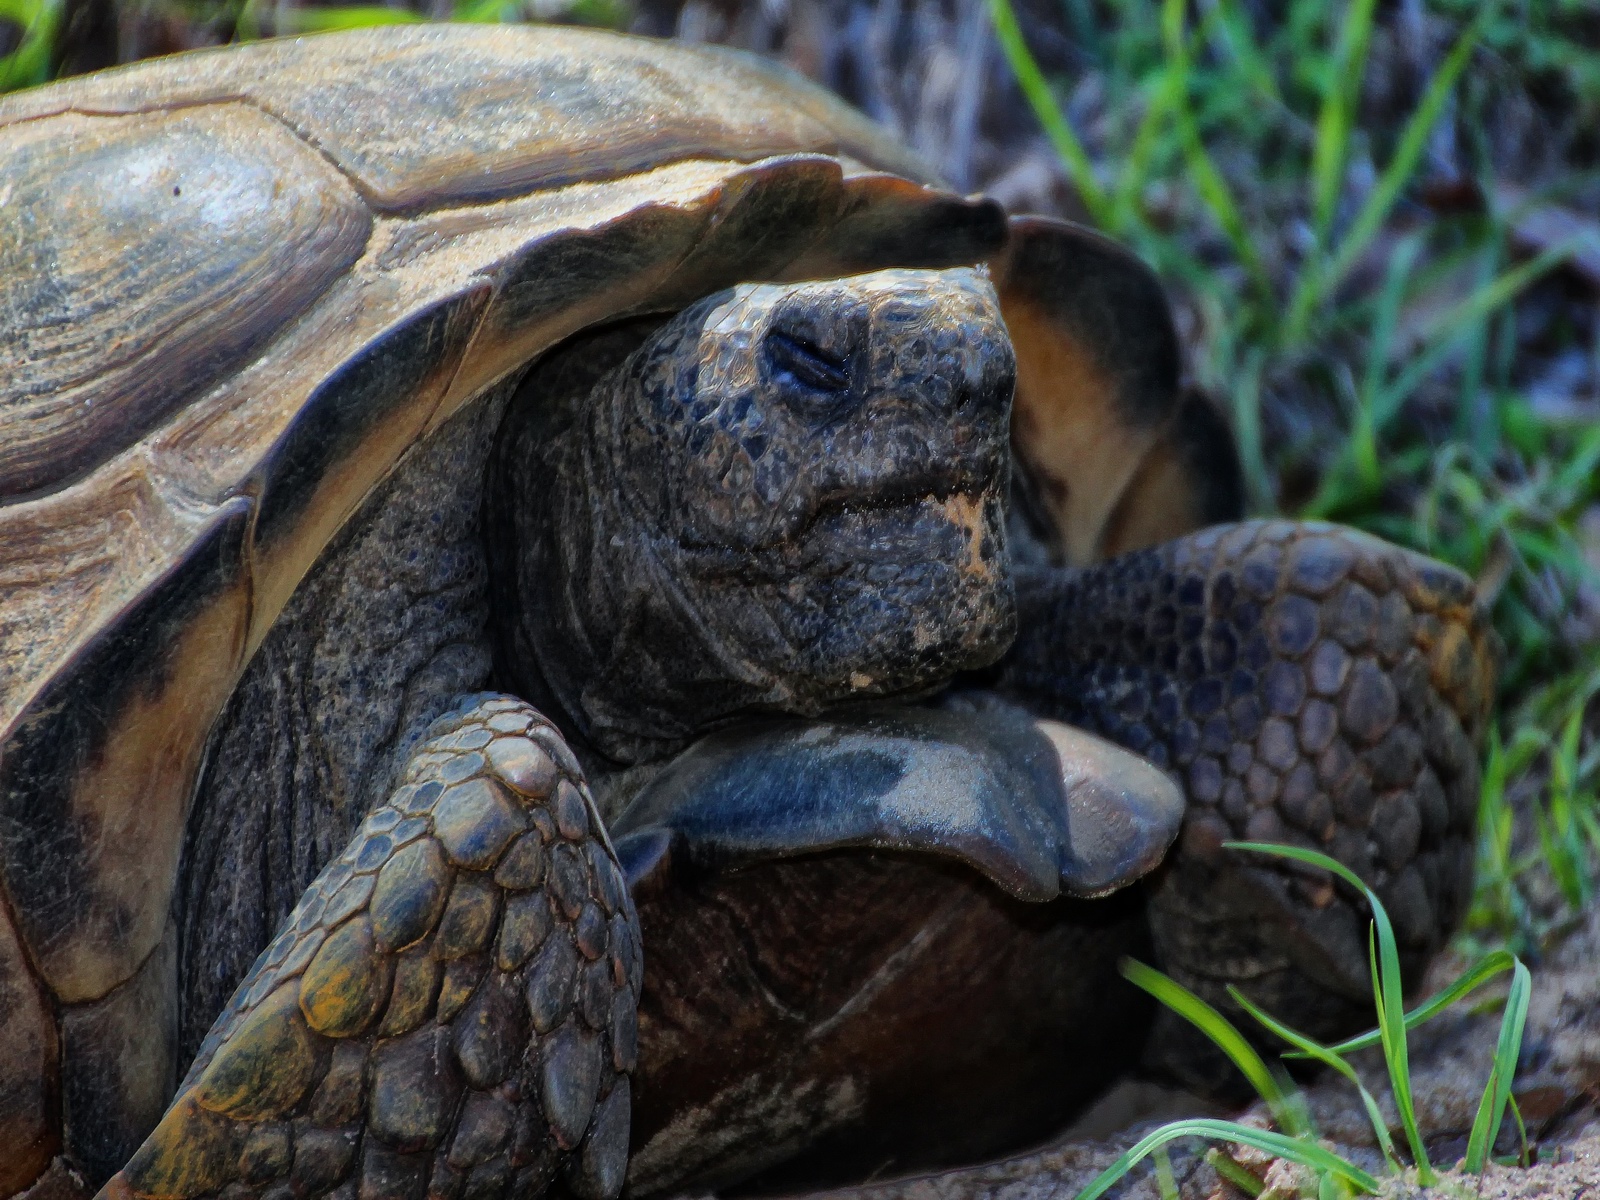 The Gopher Tortoise burrows deep into the ground requiring 4 acres of area for each tortoise.